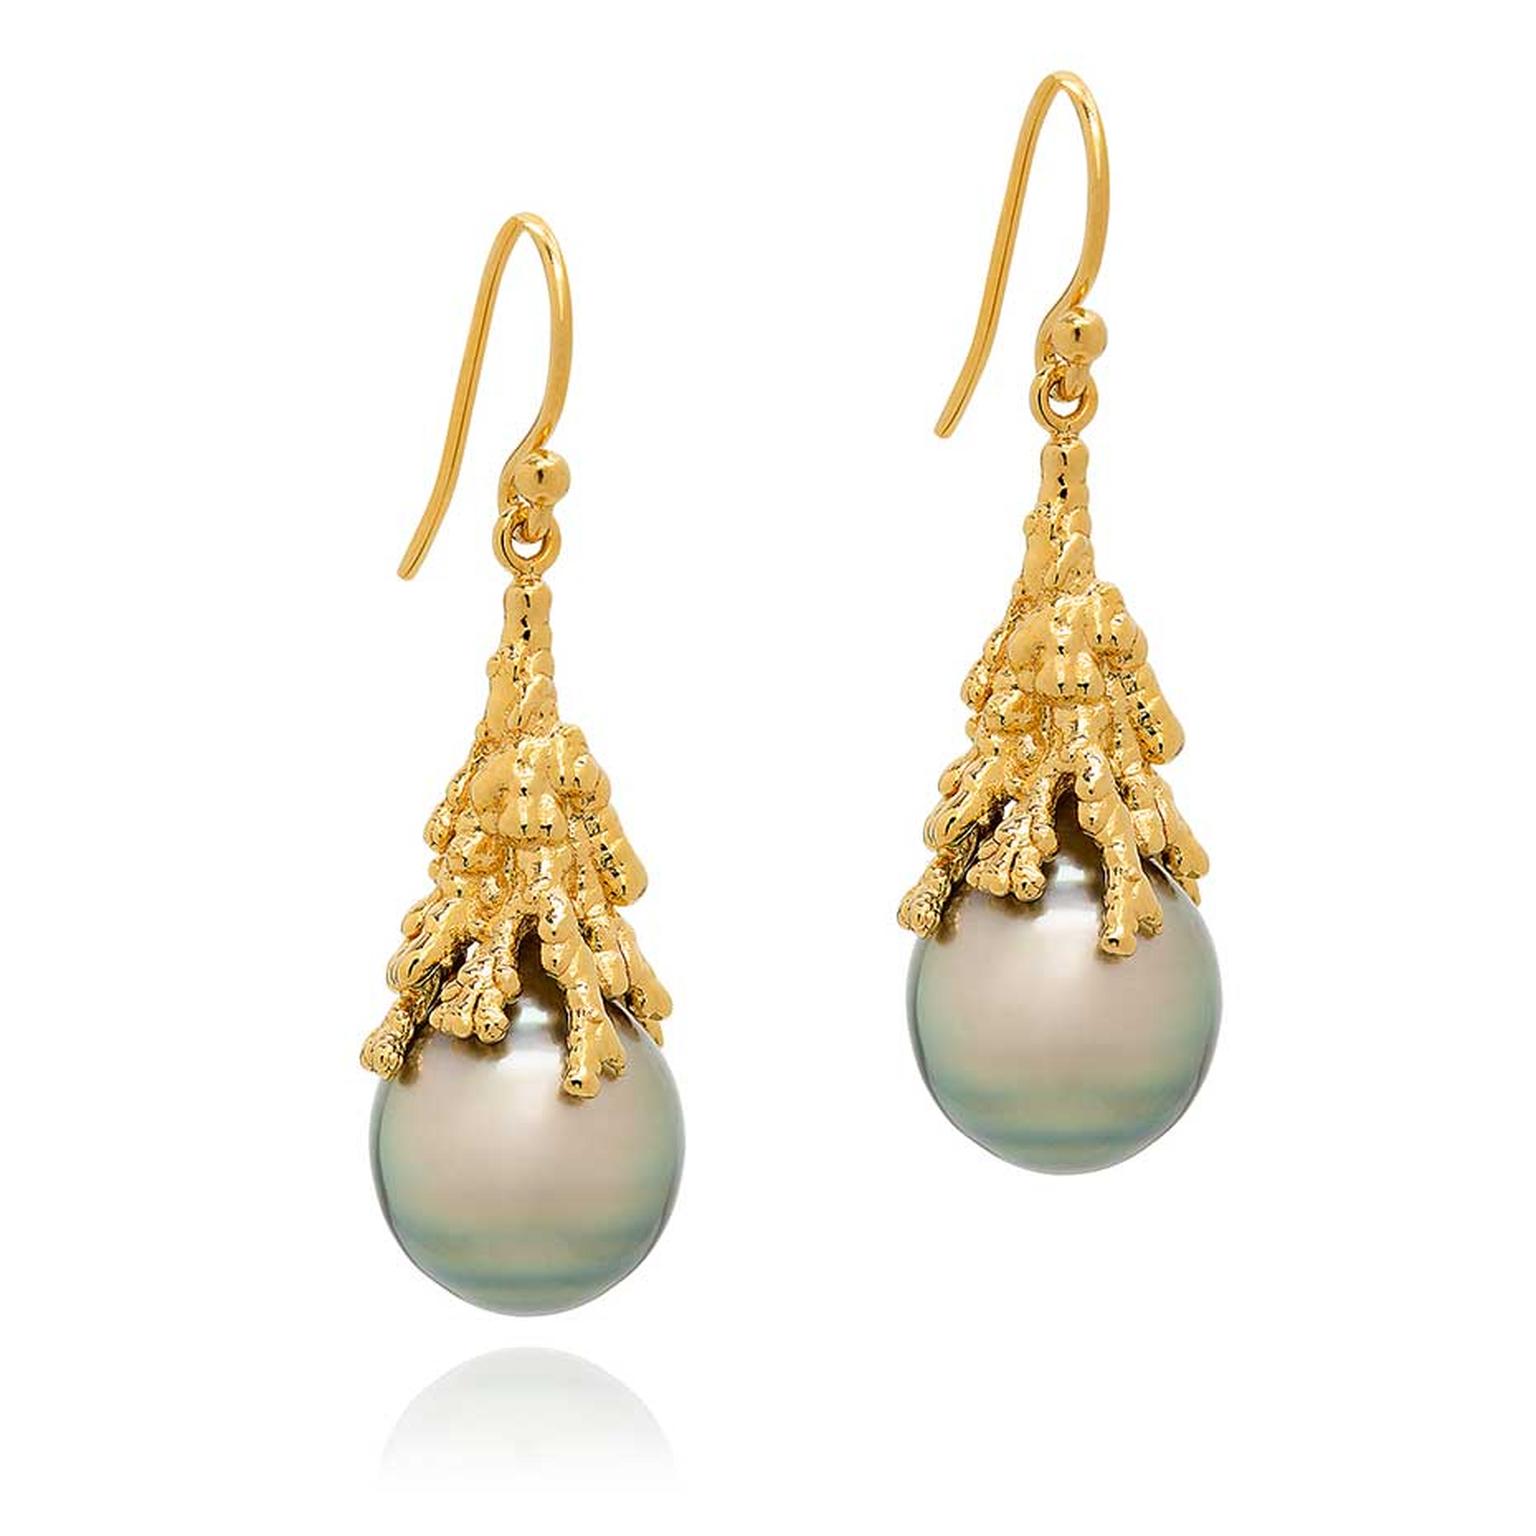 Ornella Iannuzzi joins the pioneering British designers who make up Rock Vault, which will be showing once again at the Couture Show Las Vegas. She will be debuting her Coralline Reef earrings in gold with Tahitian pearls